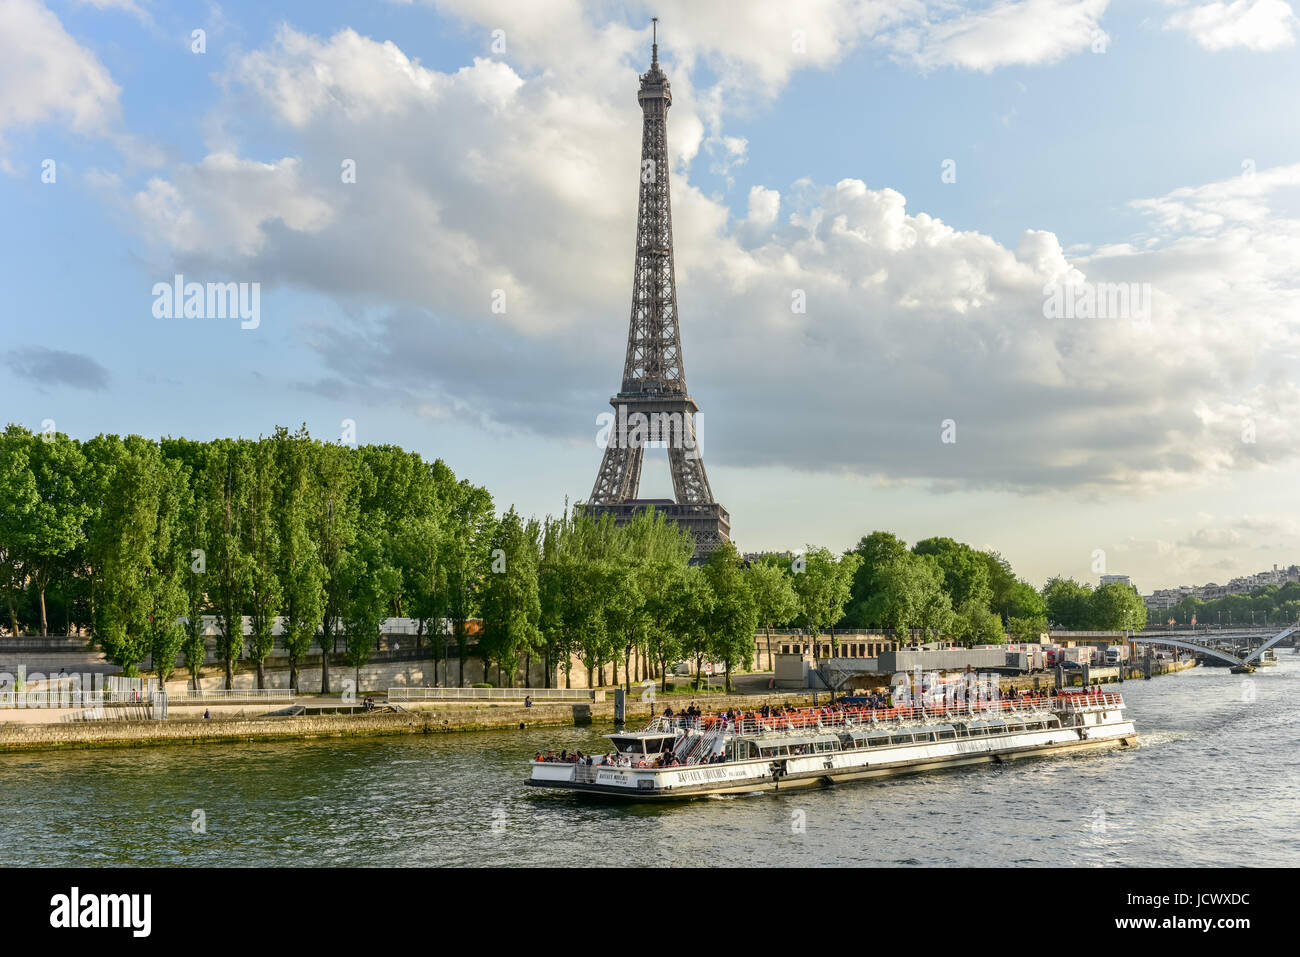 The Eiffel Tower, a wrought iron lattice tower on the Champ de Mars in Paris, France. Stock Photo